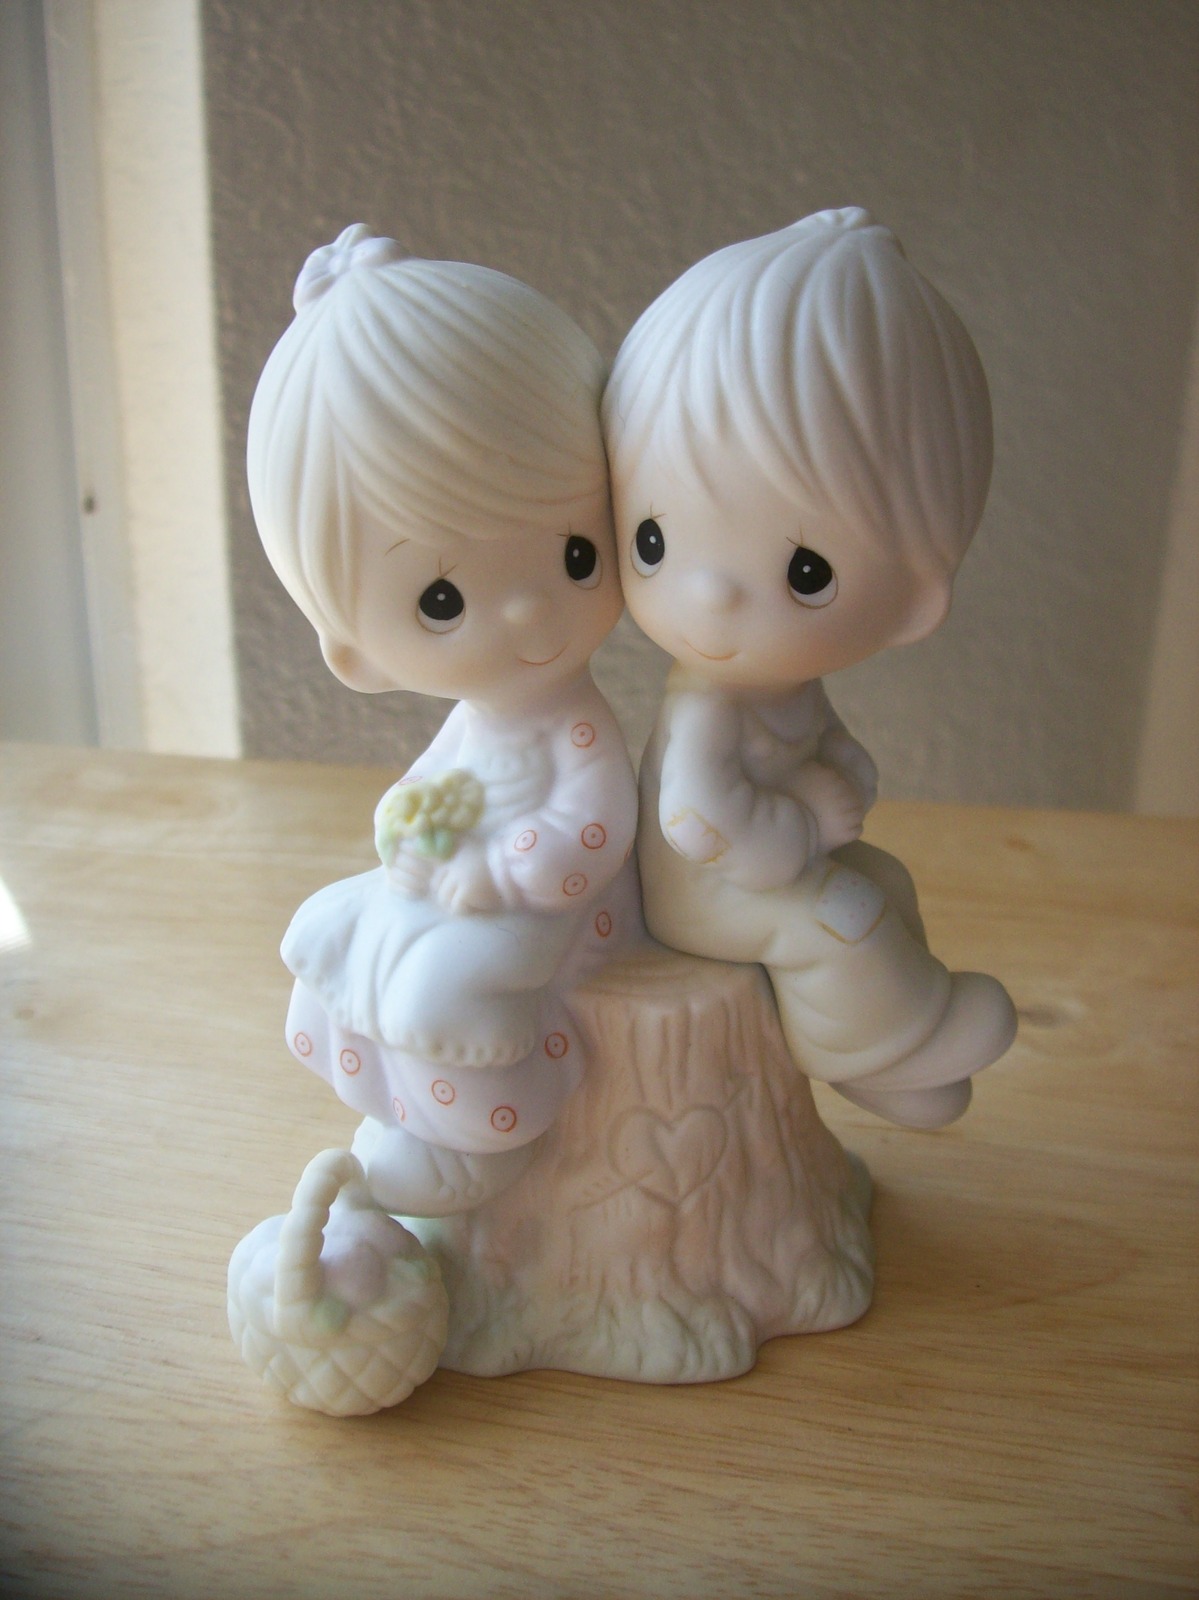 1978 Precious Moments “Love One Another” Figurine  - $25.00